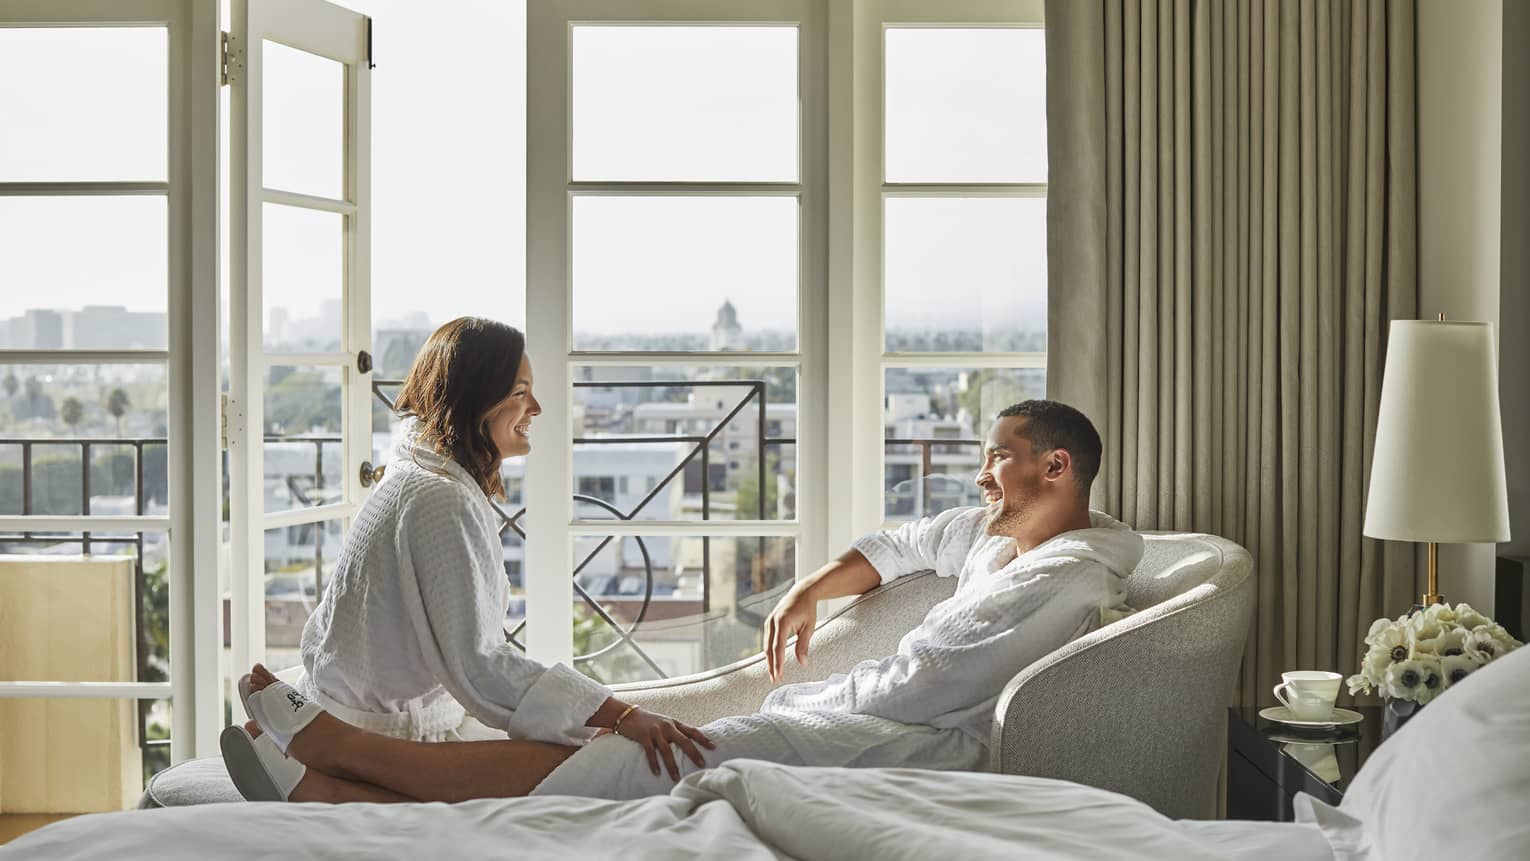 Smiling man and woman wearing bathrobes, lounging in front of sunny hotel room windows